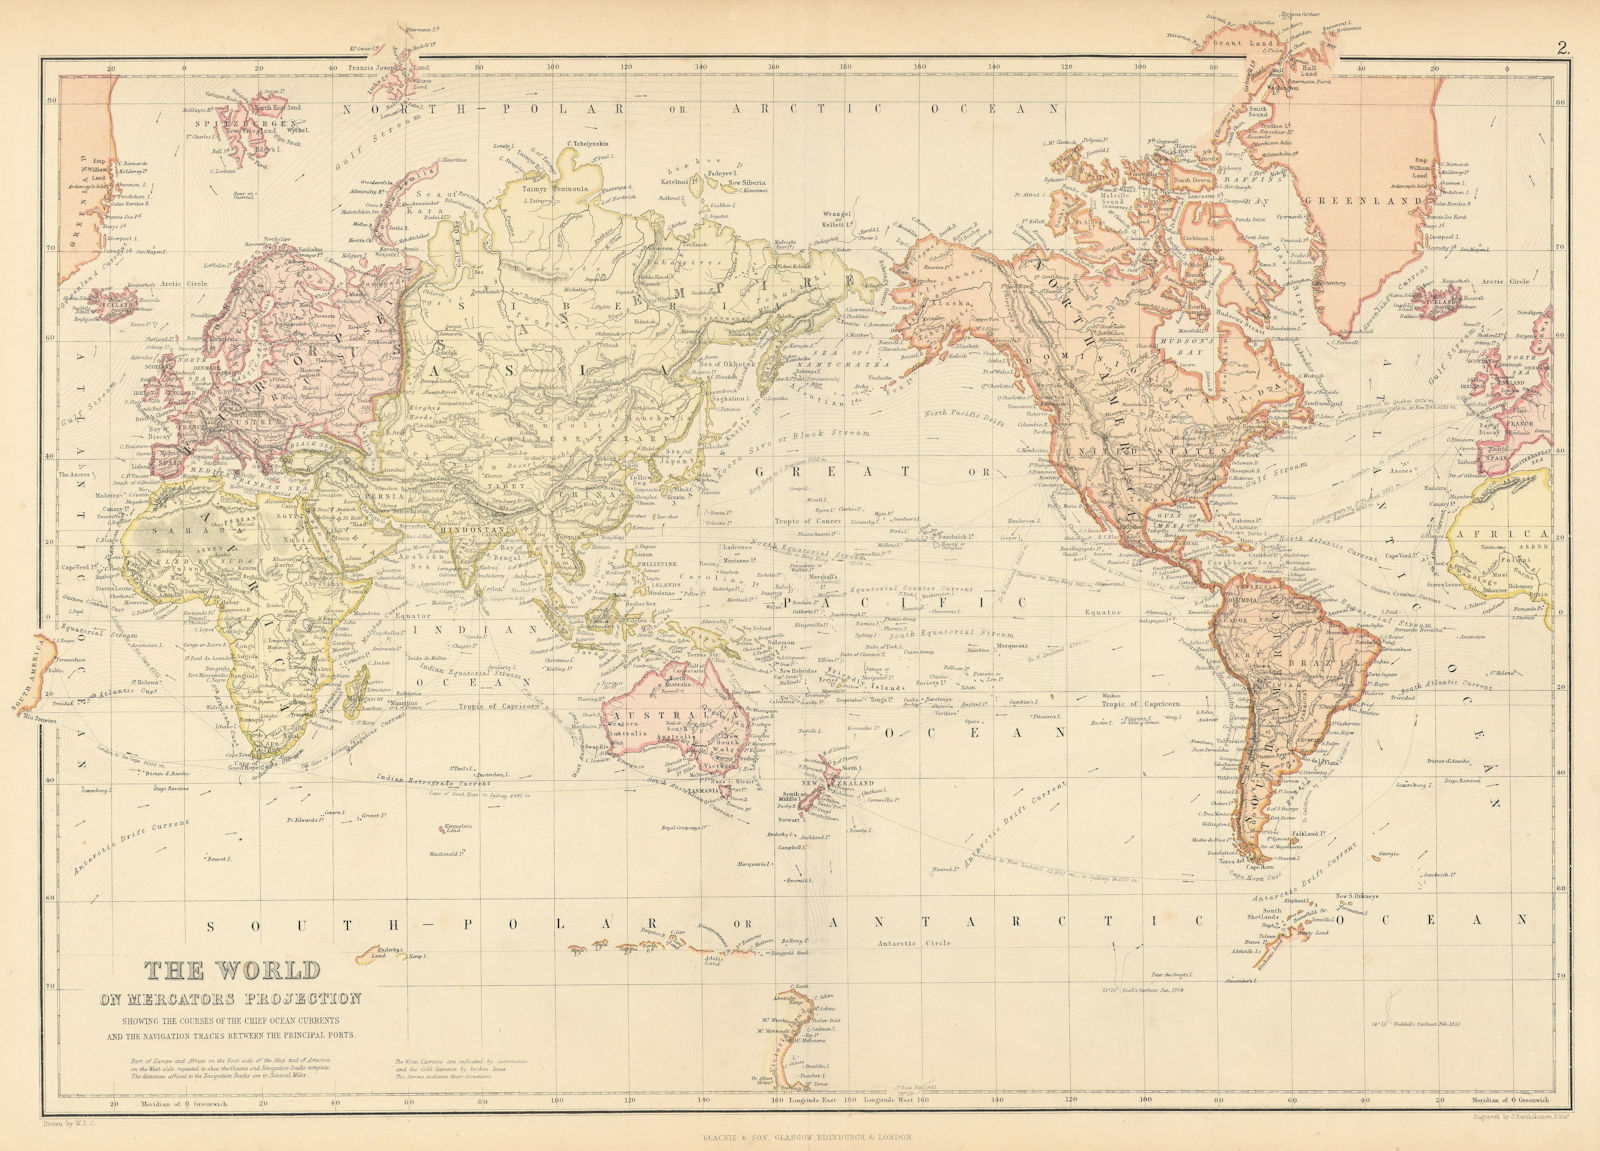 Associate Product WORLD. Mercator's projection. Ocean currents & shipping routes. BLACKIE 1886 map